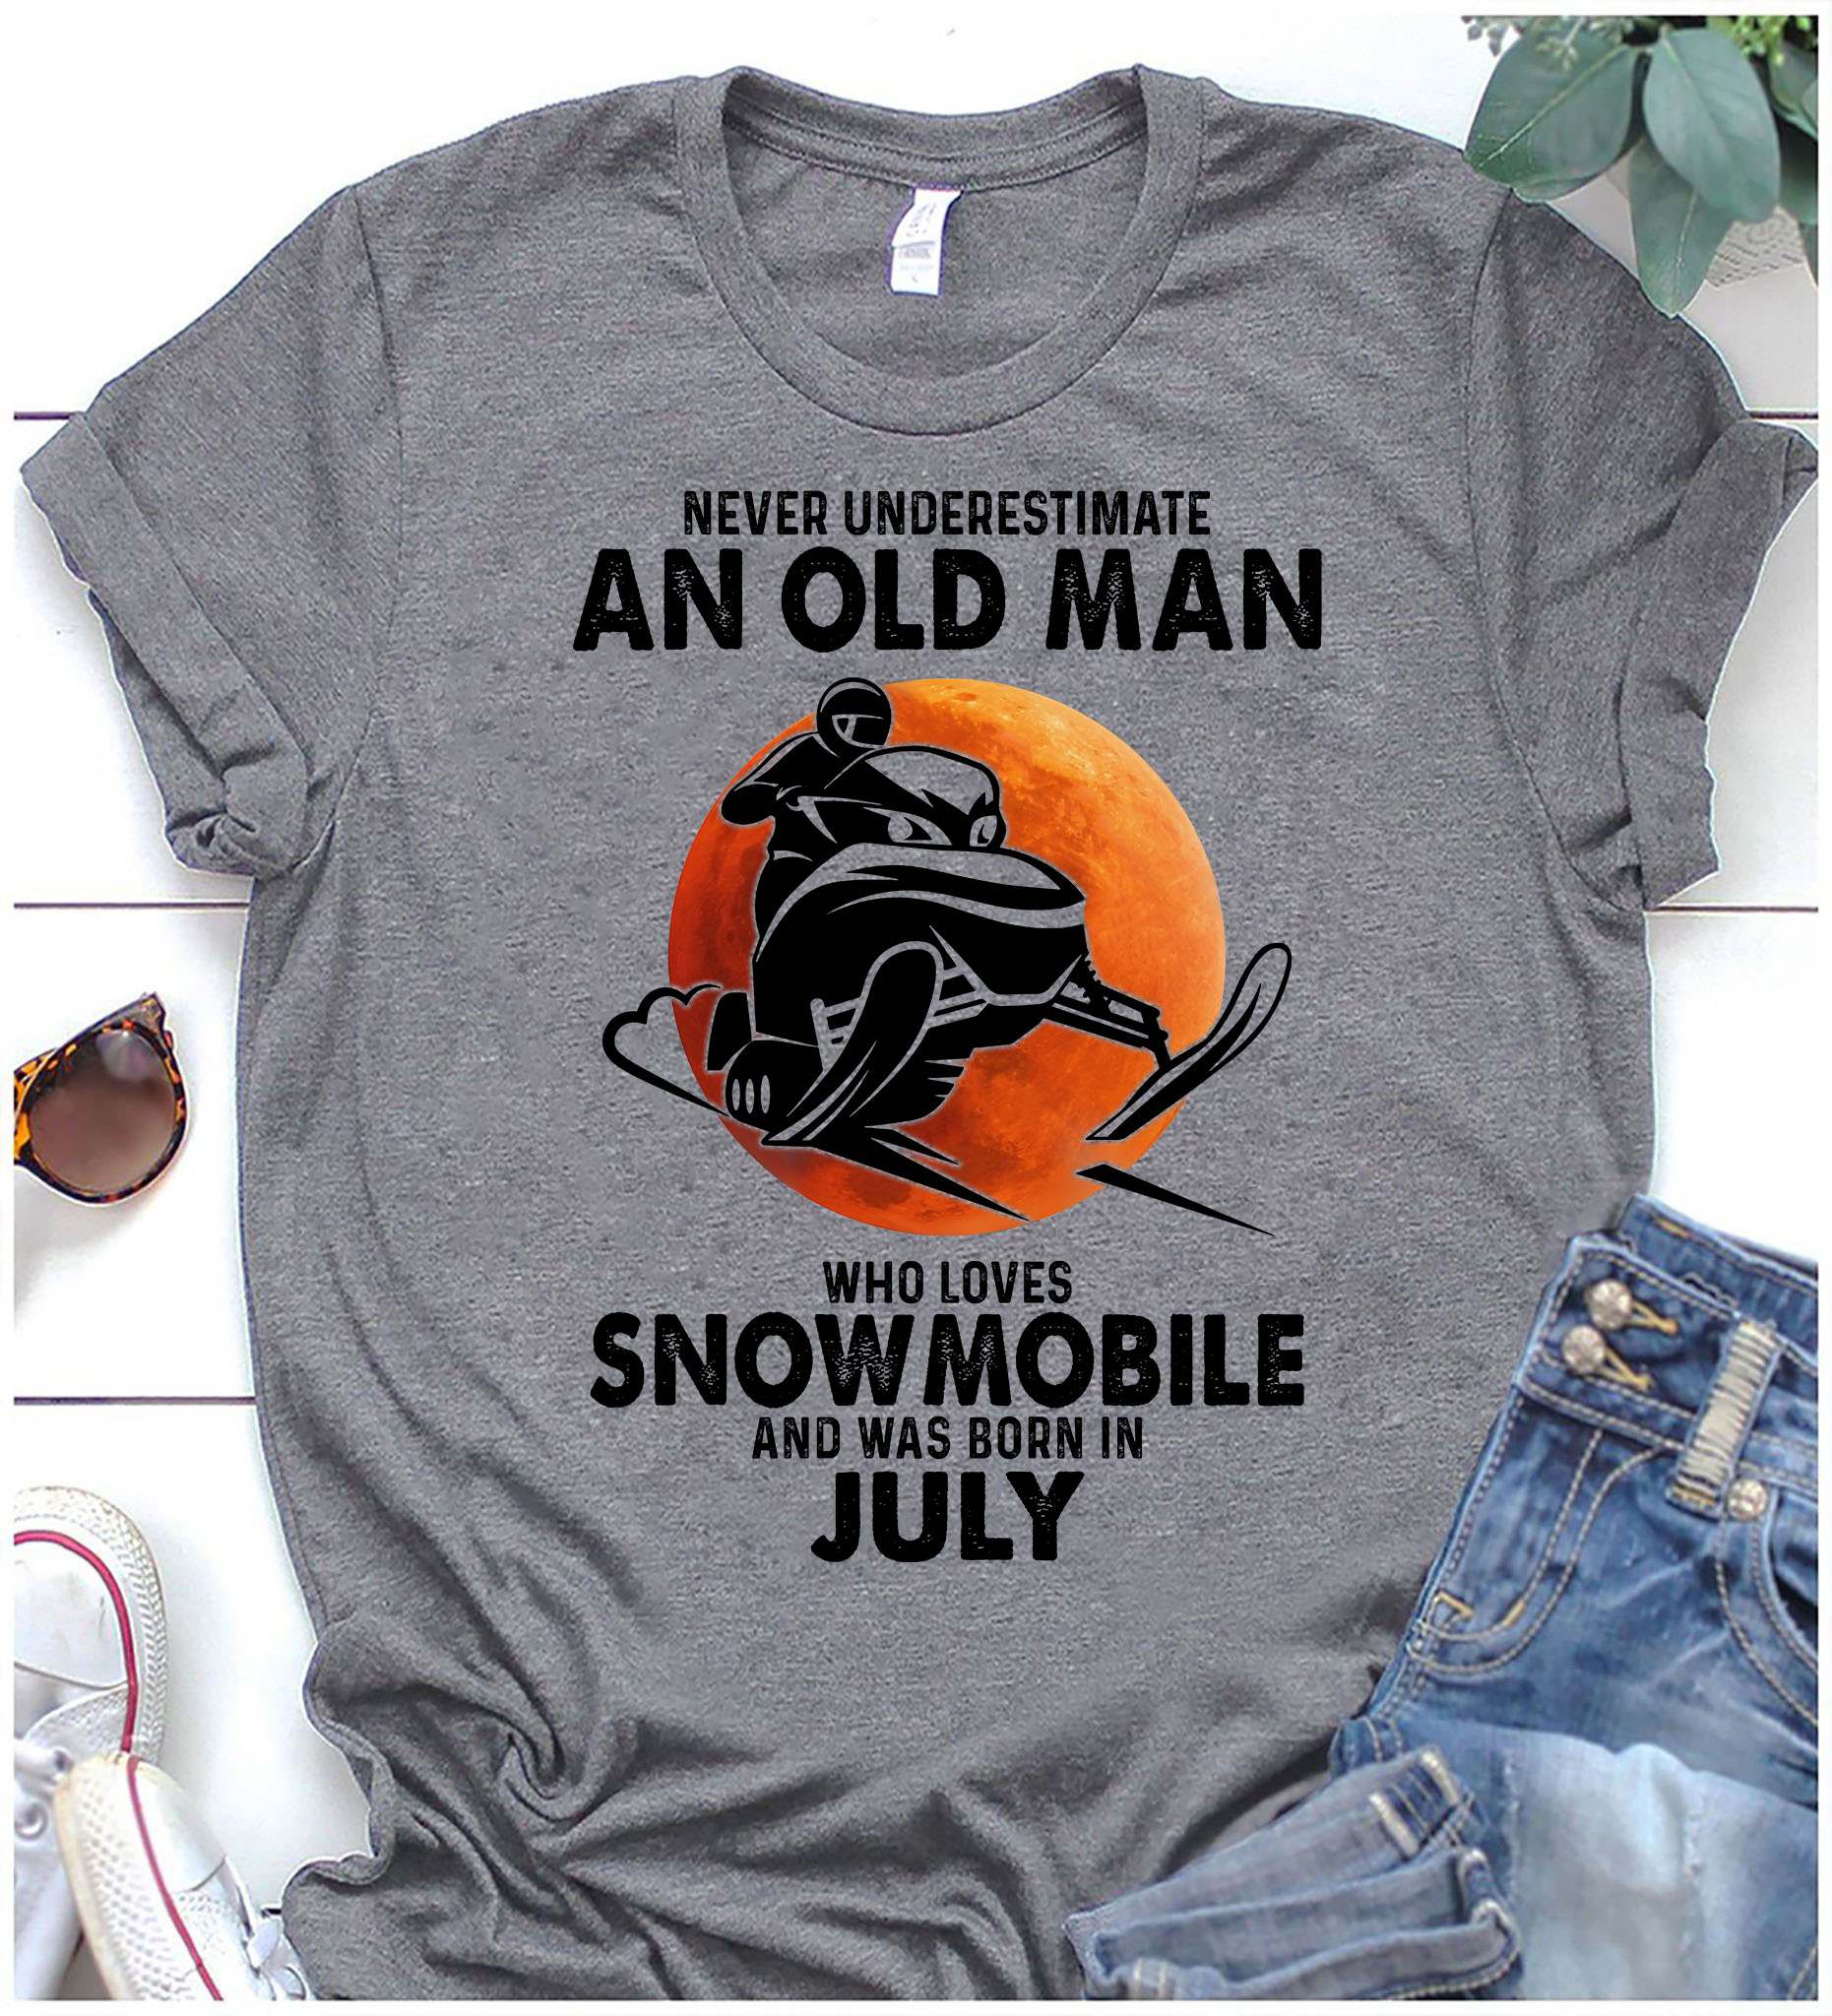 Never underestimate an old man who loves snowmobile and was born in July